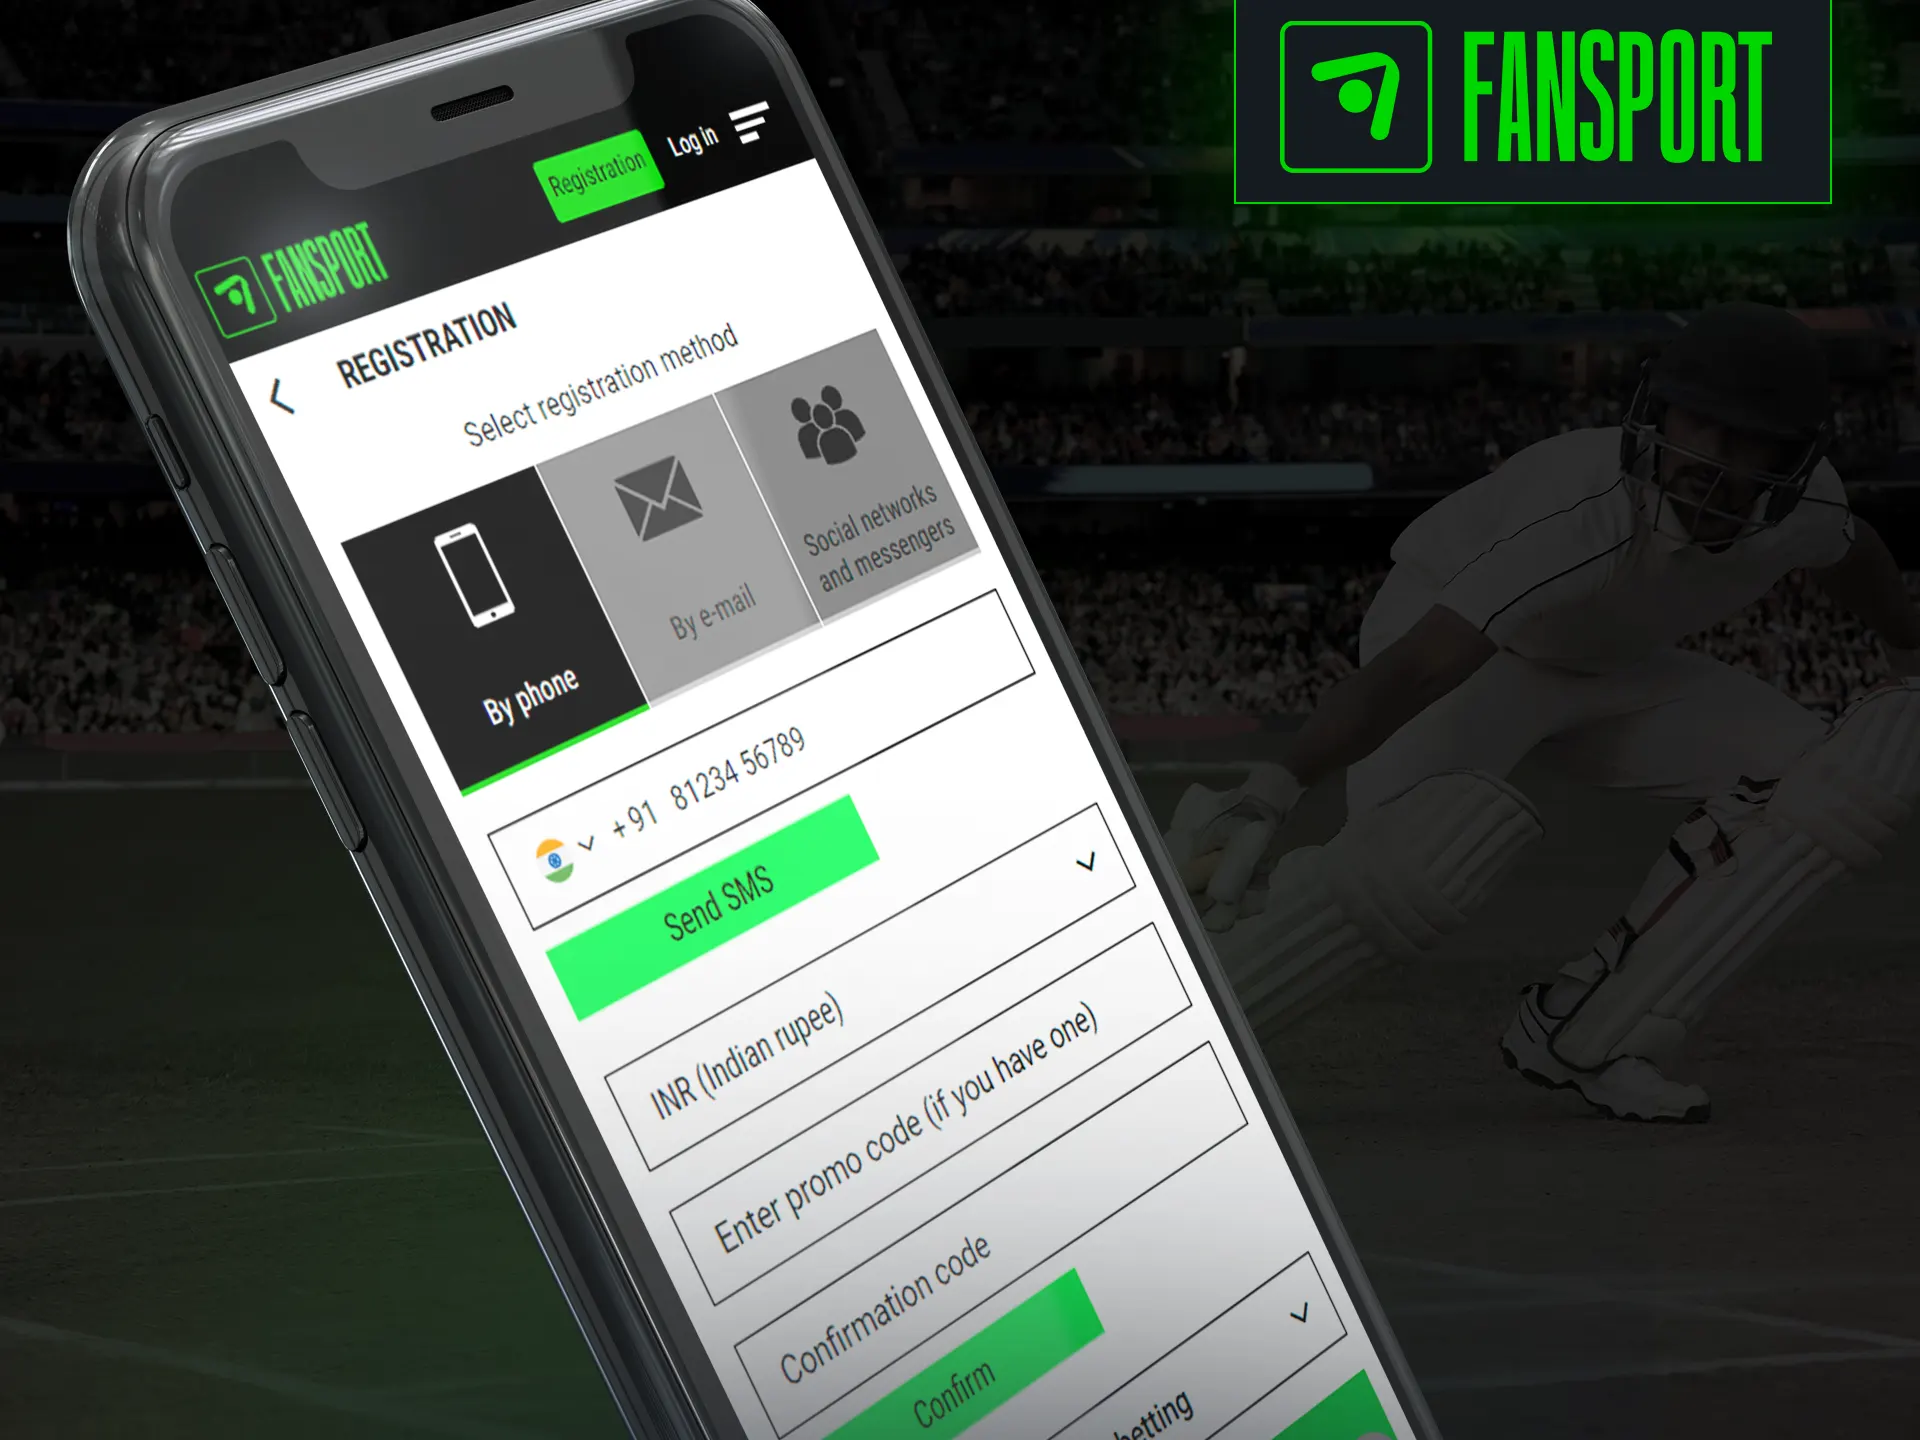 Sign up in the app or on the mobile version of the Fansport website.